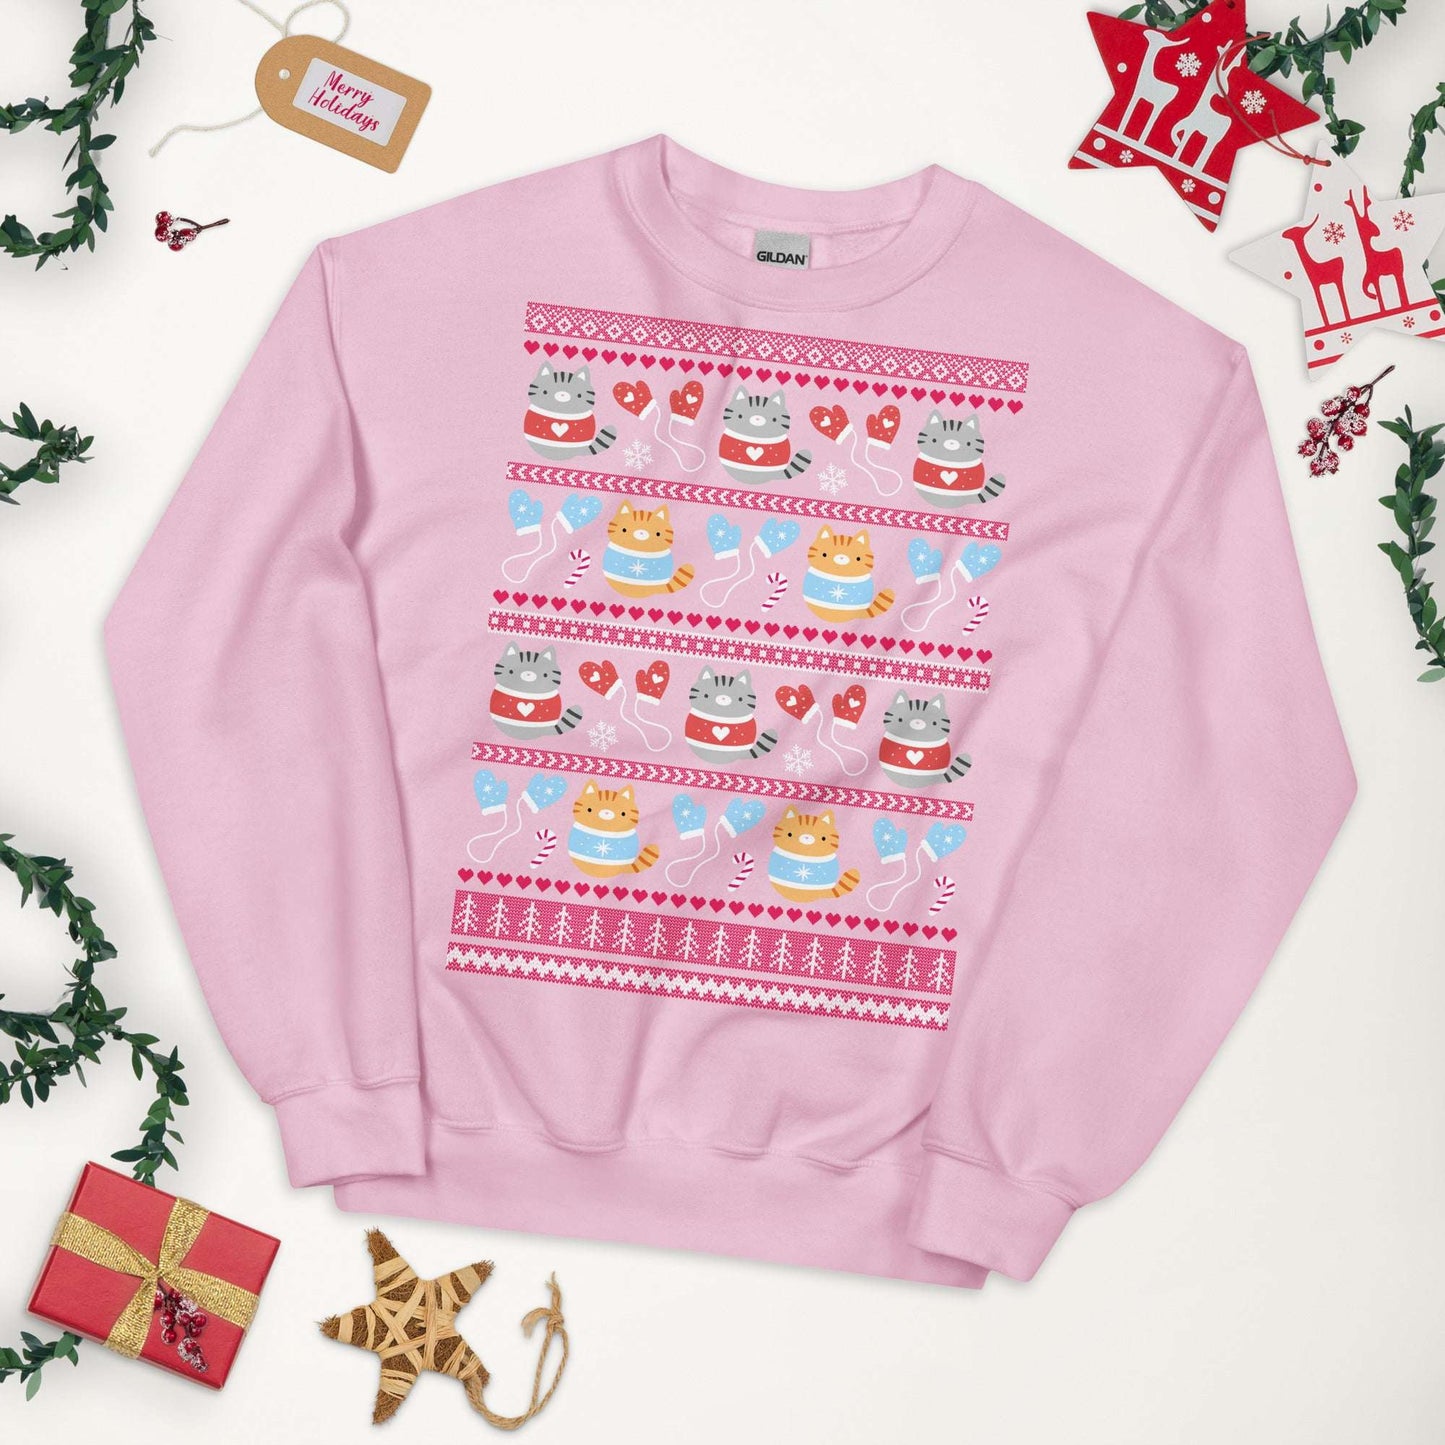 Kittens and Mittens Christmas Sweatshirt - Gift for Cat Lovers by Wild Whimsy Woolies